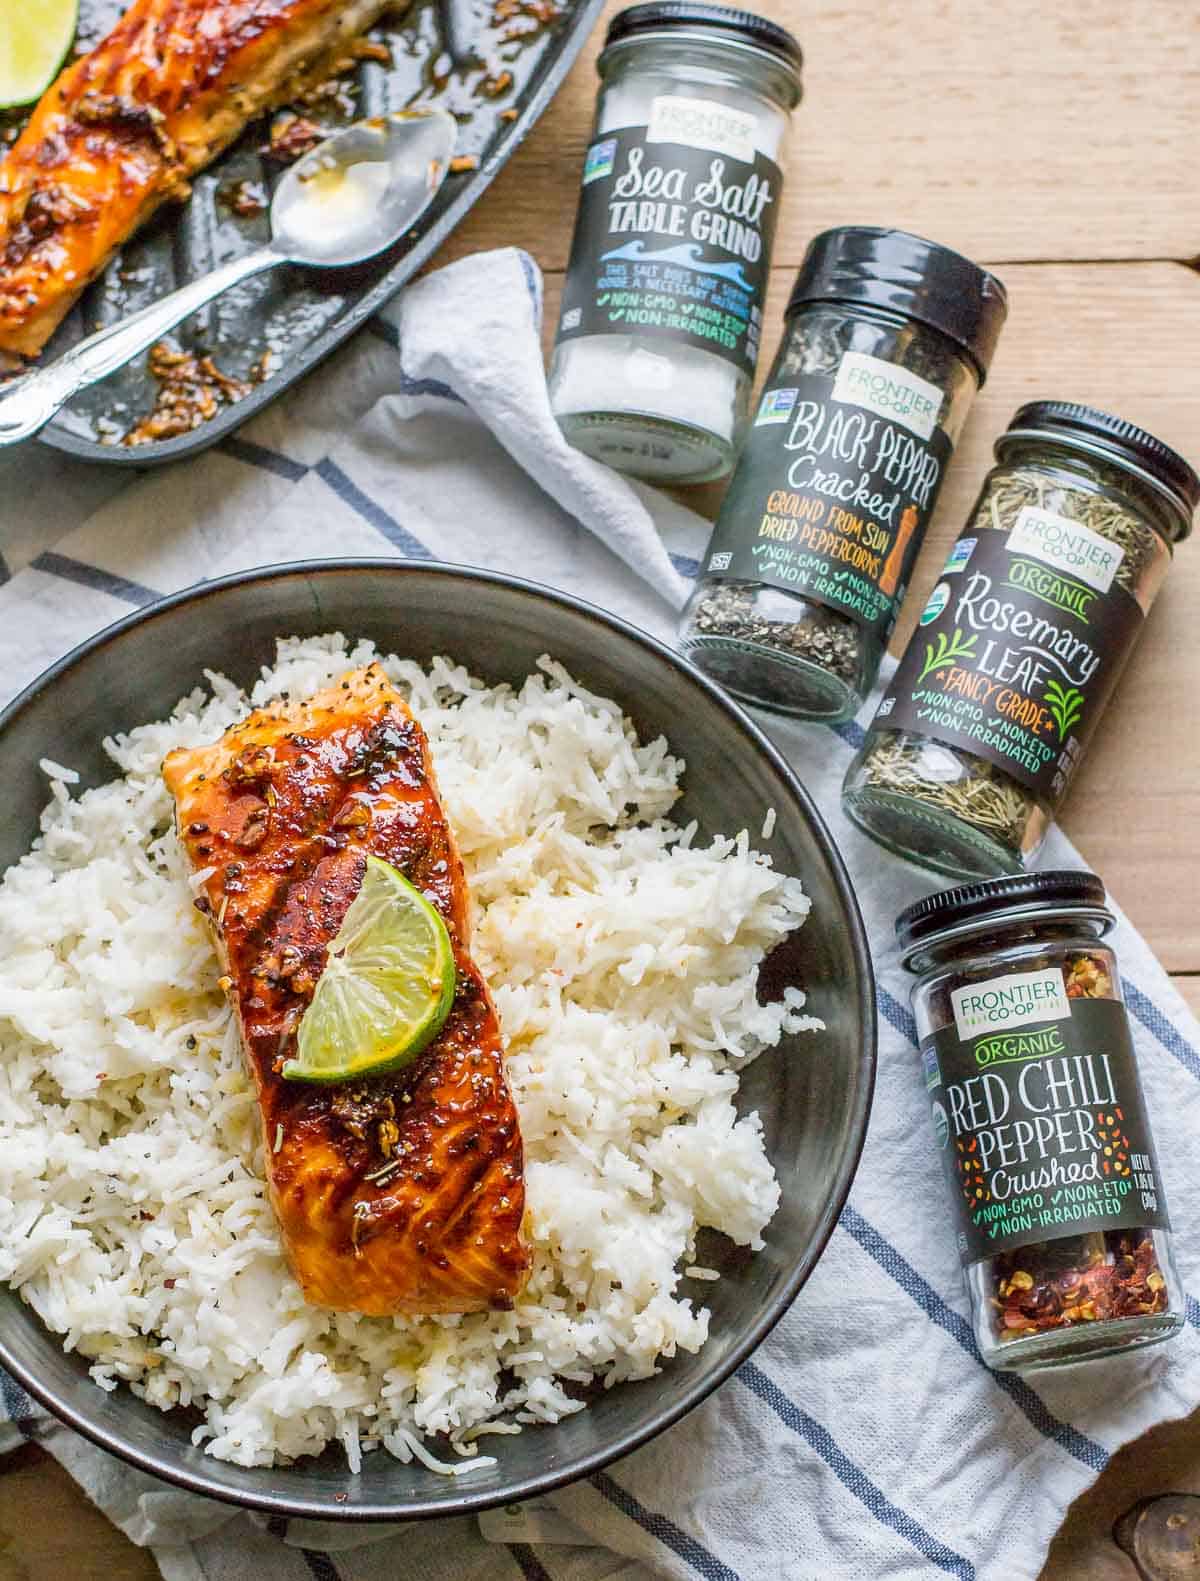 This 15-minute grilled honey garlic salmon is perfect for days when you crave a fancy meal but don't want to pay for it or spend hours making it. It is so finger-licking good that you'll imagine you are in an upscale restaurant enjoying a gourmet meal.